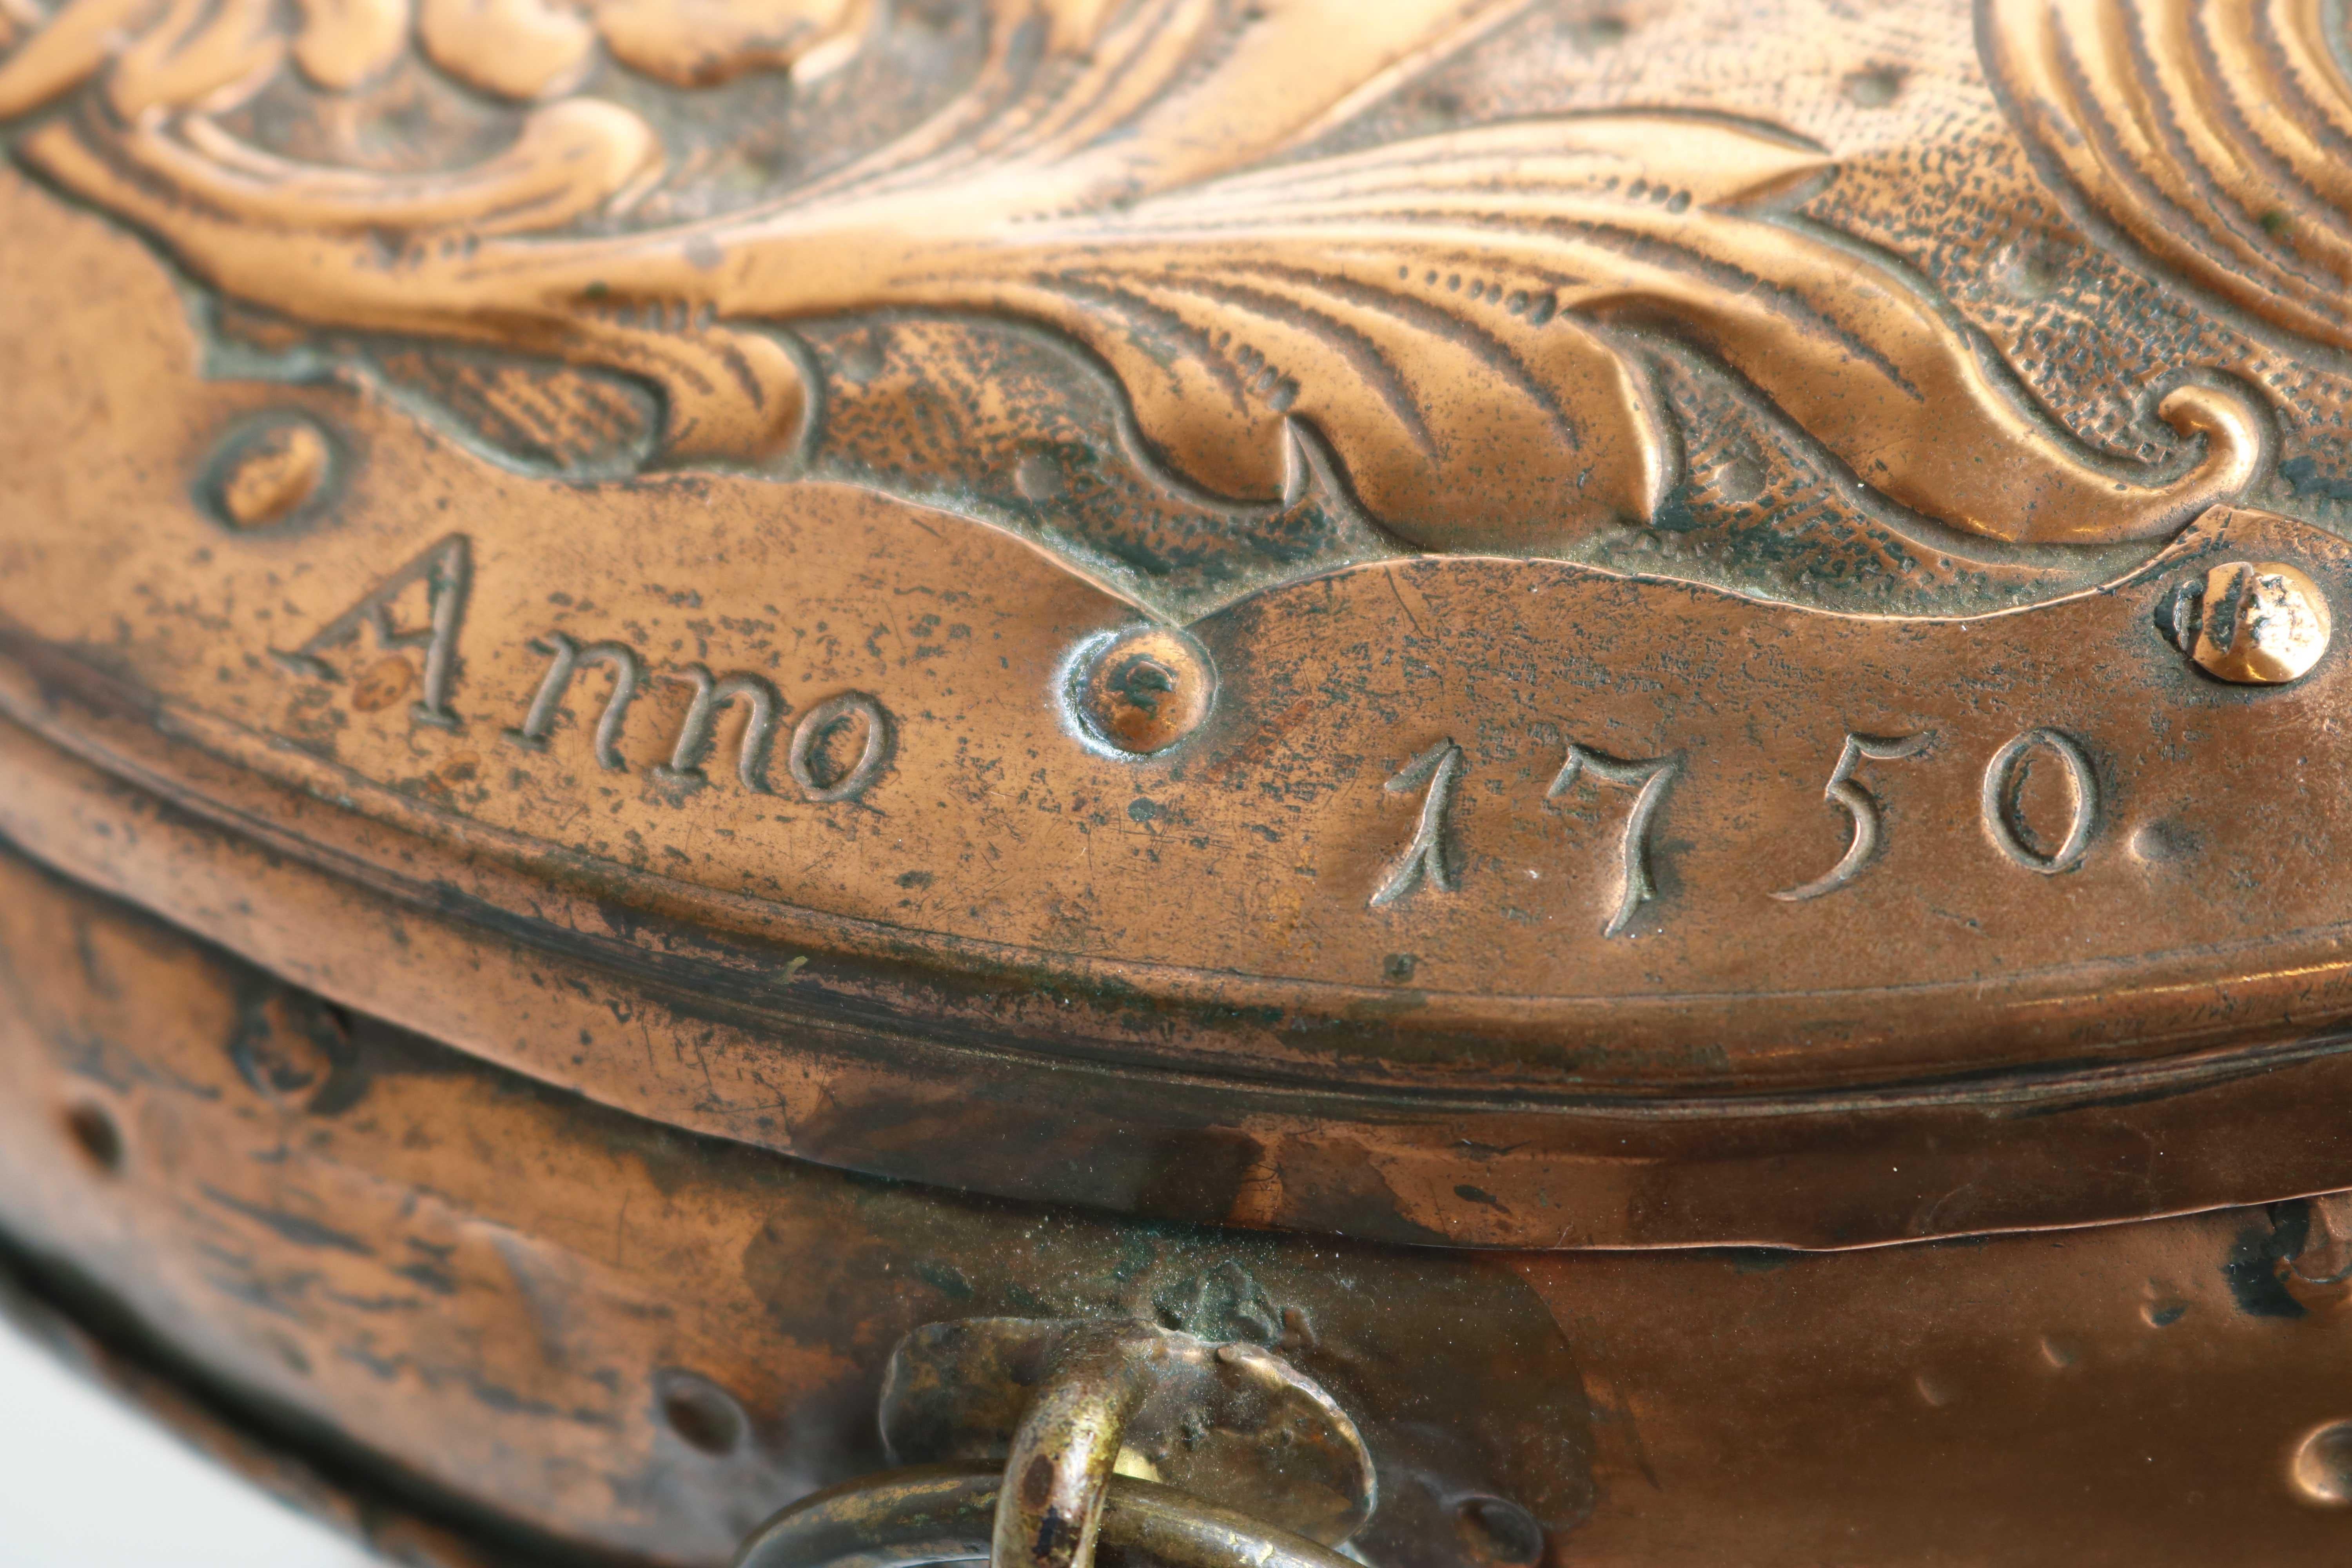 Folk Art Decorated Dutch Antique Copper Bowl / Pot with Lid, 18th Century, Dated 1750 For Sale